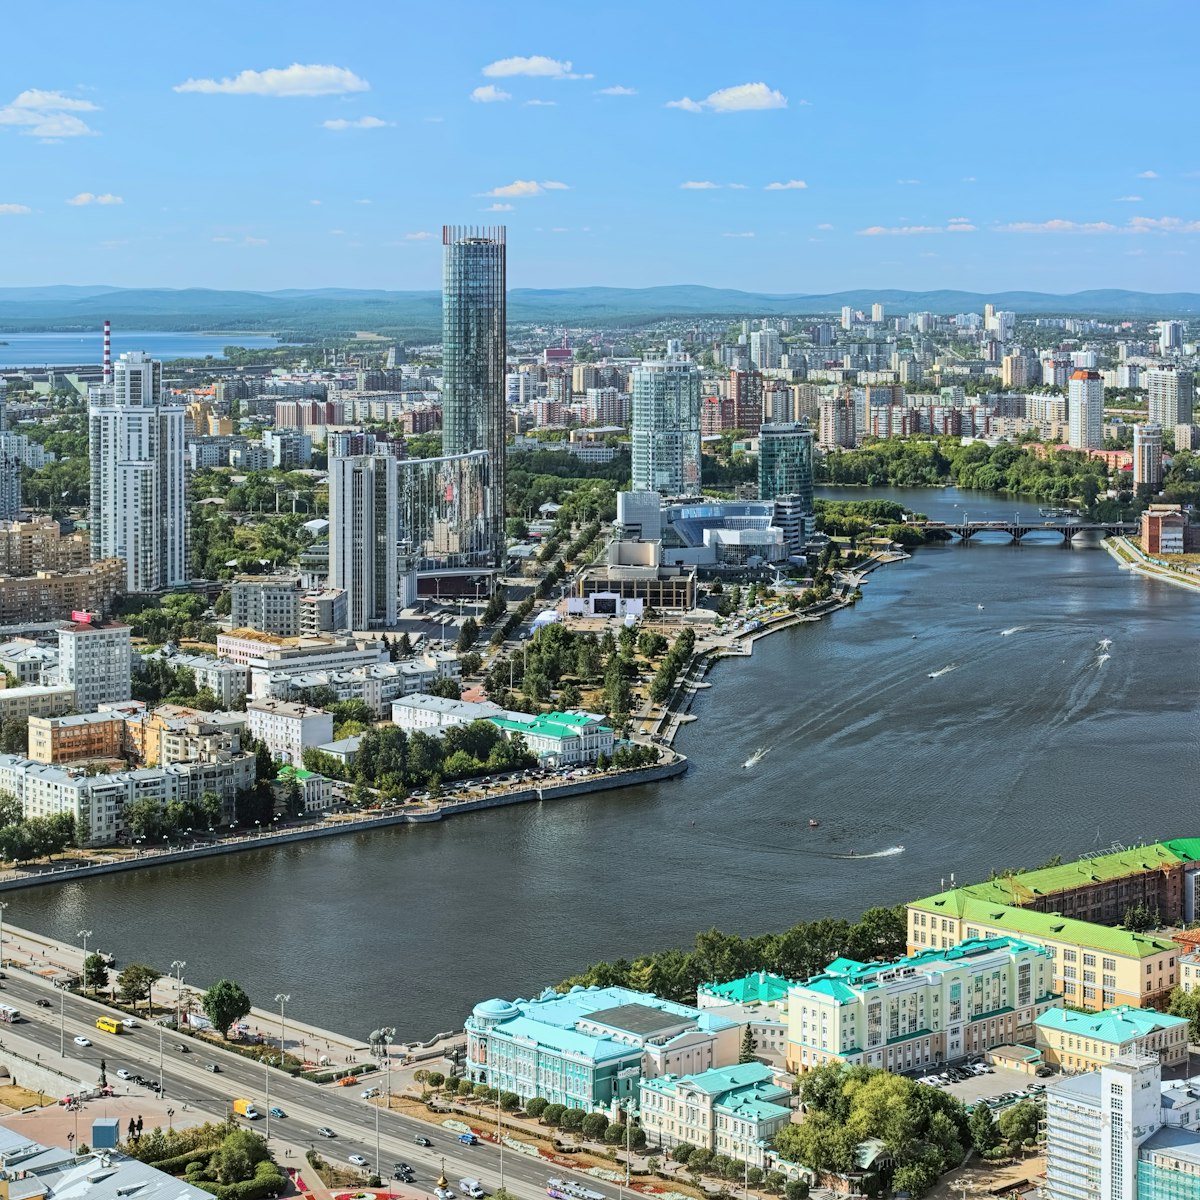 View of the historical center, city pond with dam, Yekaterinburg-City neighborhood and north-western side of the city from the observation deck on the 52nd floor of the Vysotsky skyscraper at 186 meters above the ground in Yekaterinburg.